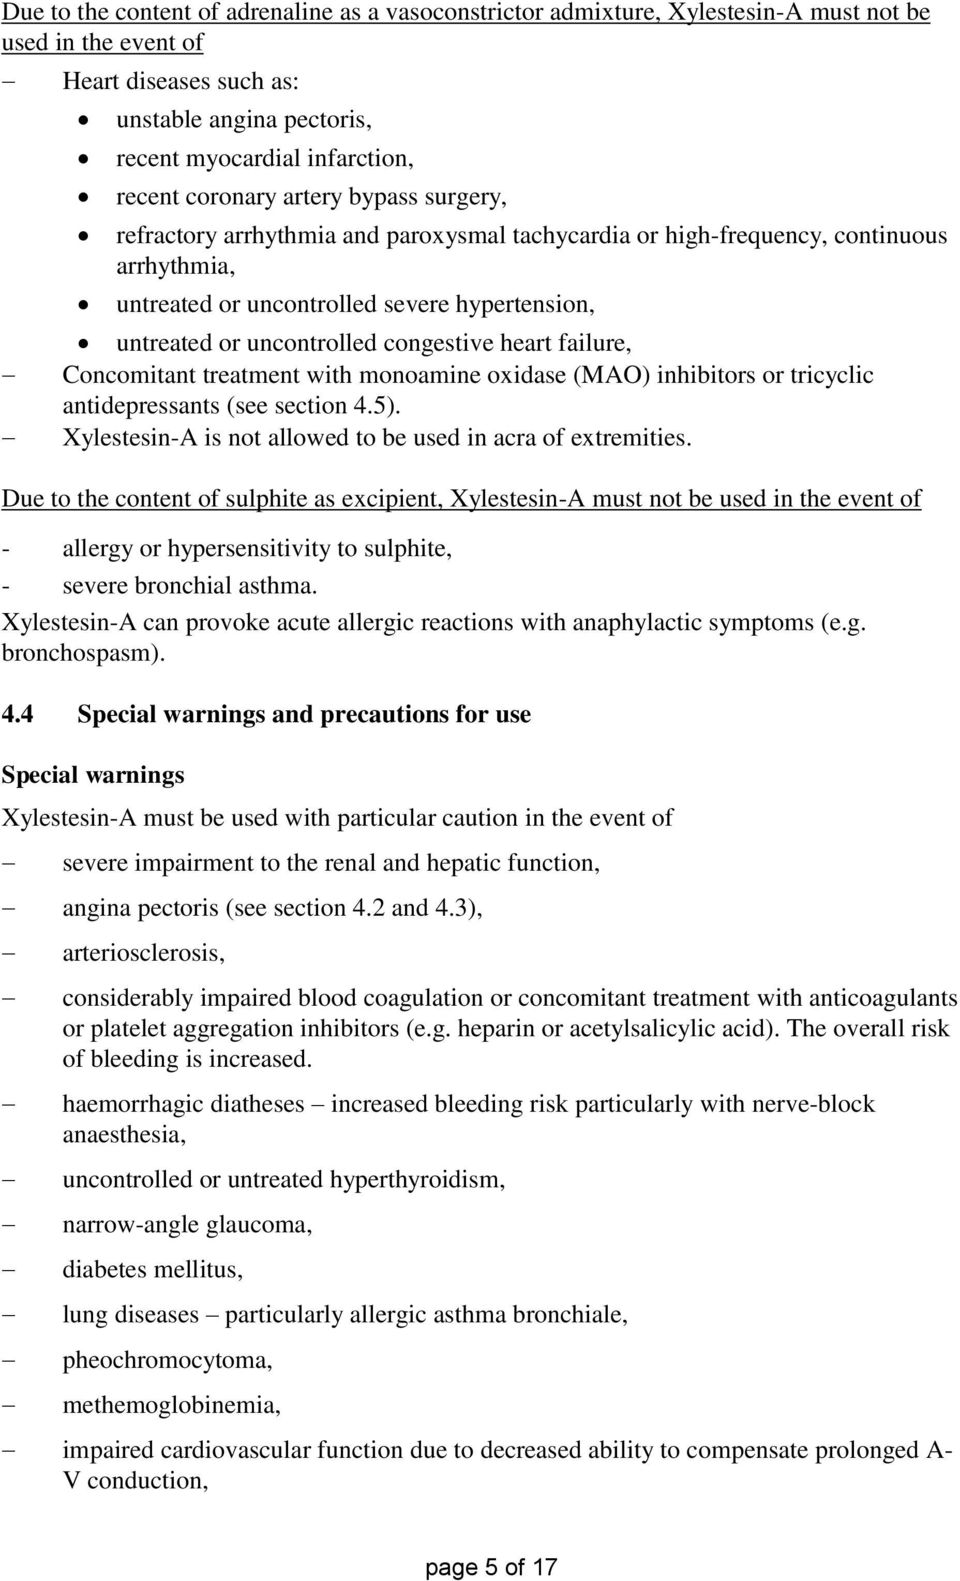 congestive heart failure, Concomitant treatment with monoamine oxidase (MAO) inhibitors or tricyclic antidepressants (see section 4.5). Xylestesin-A is not allowed to be used in acra of extremities.